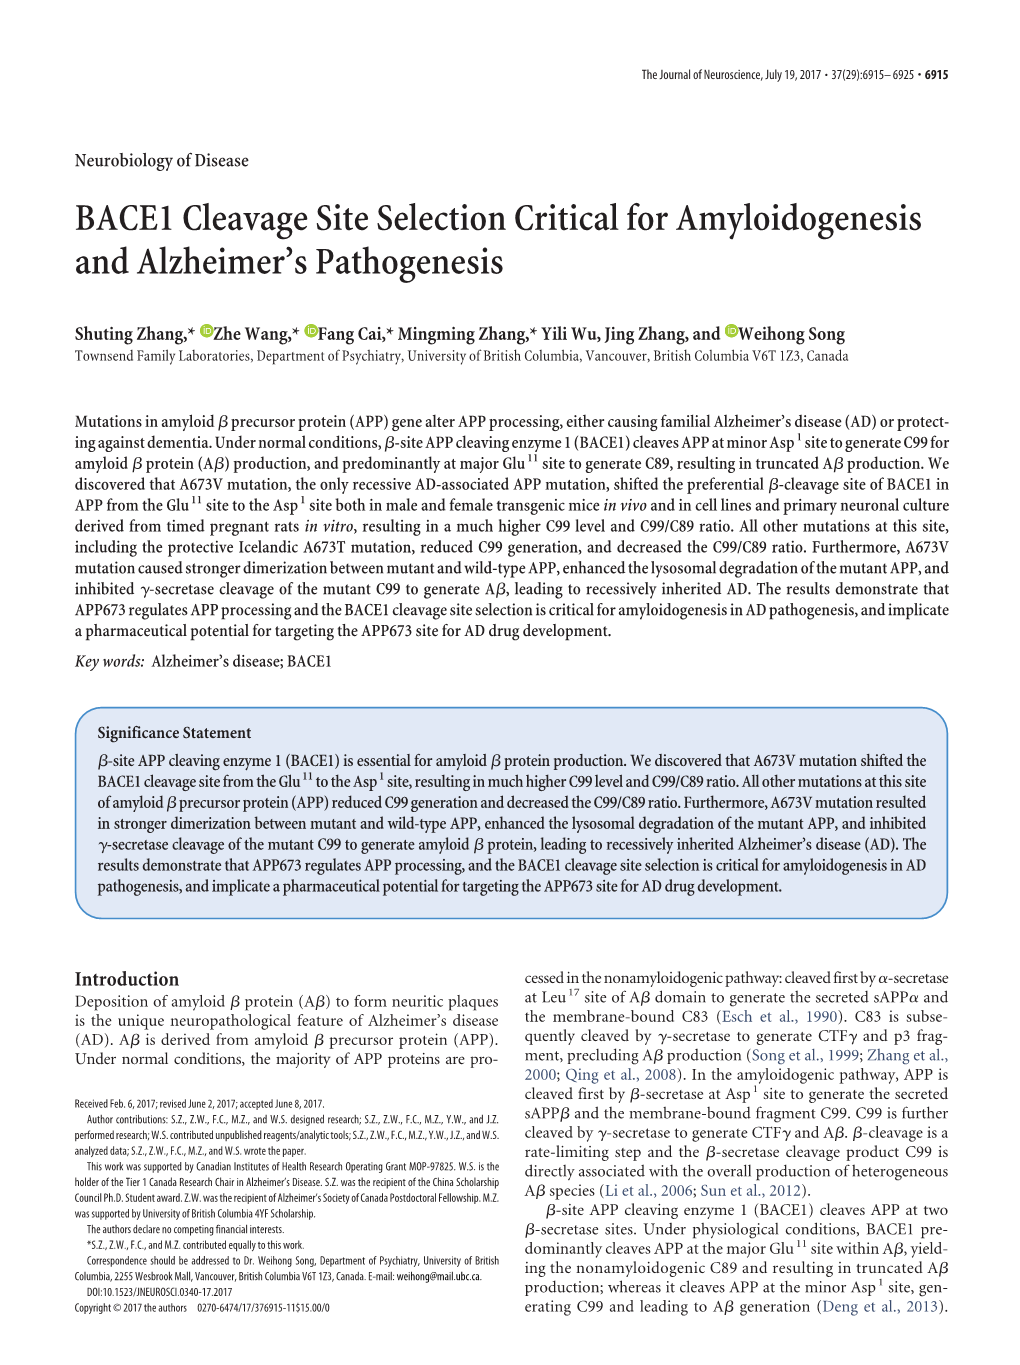 BACE1 Cleavage Site Selection Critical for Amyloidogenesis and Alzheimer’S Pathogenesis